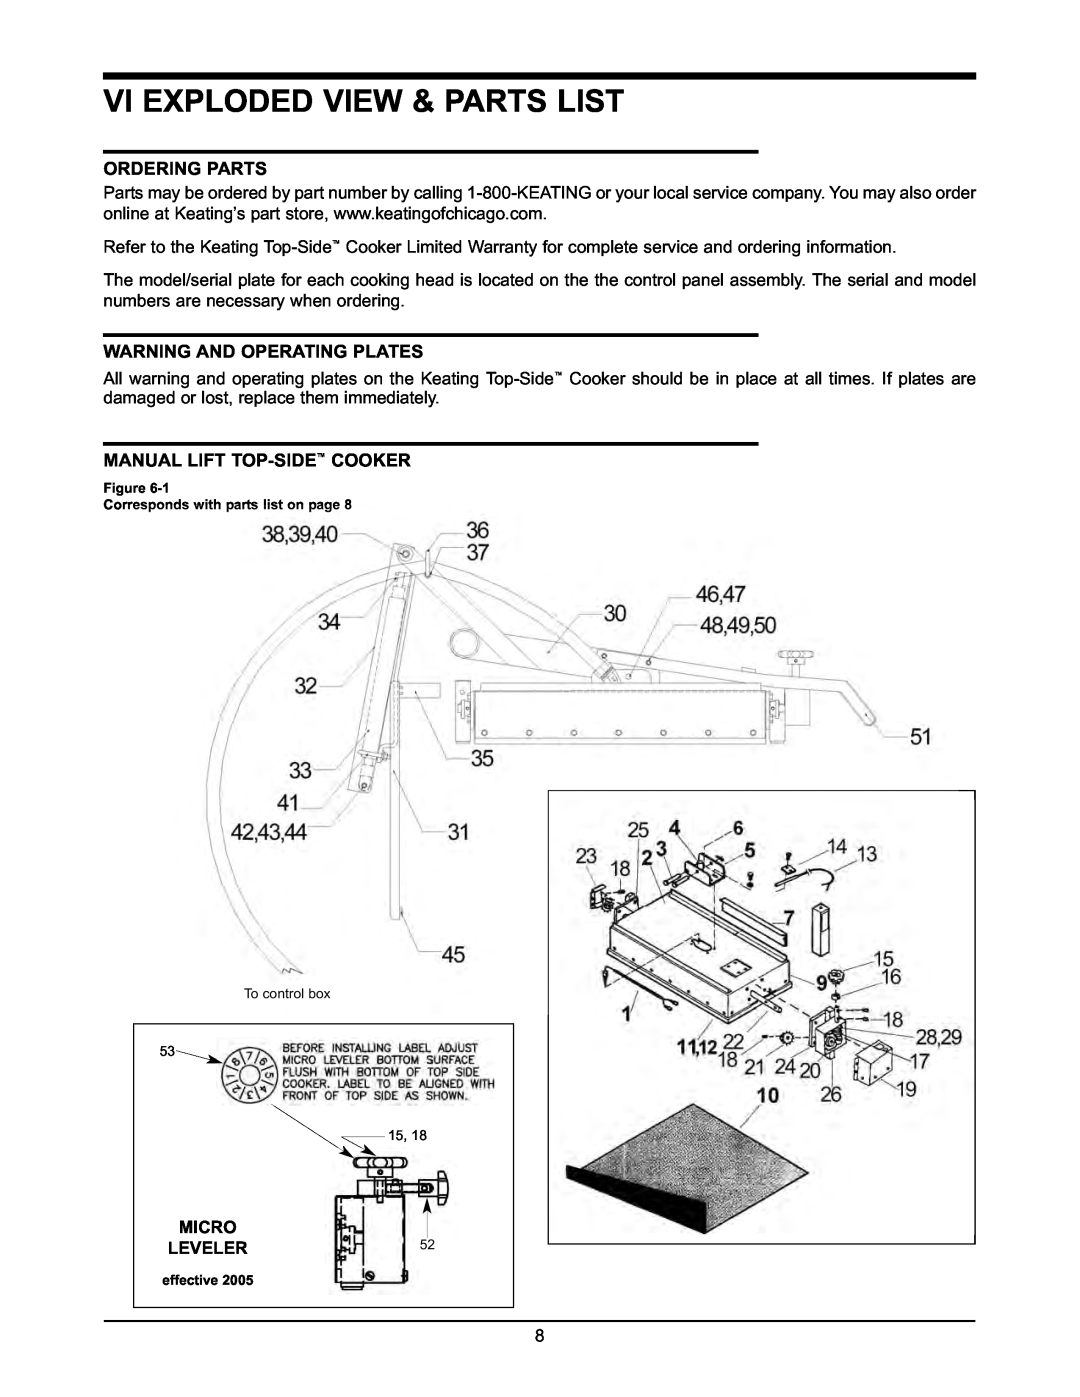 Keating Of Chicago 2005 Vi Exploded View & Parts List, Ordering Parts, Warning And Operating Plates, MICRO LEVELER52 